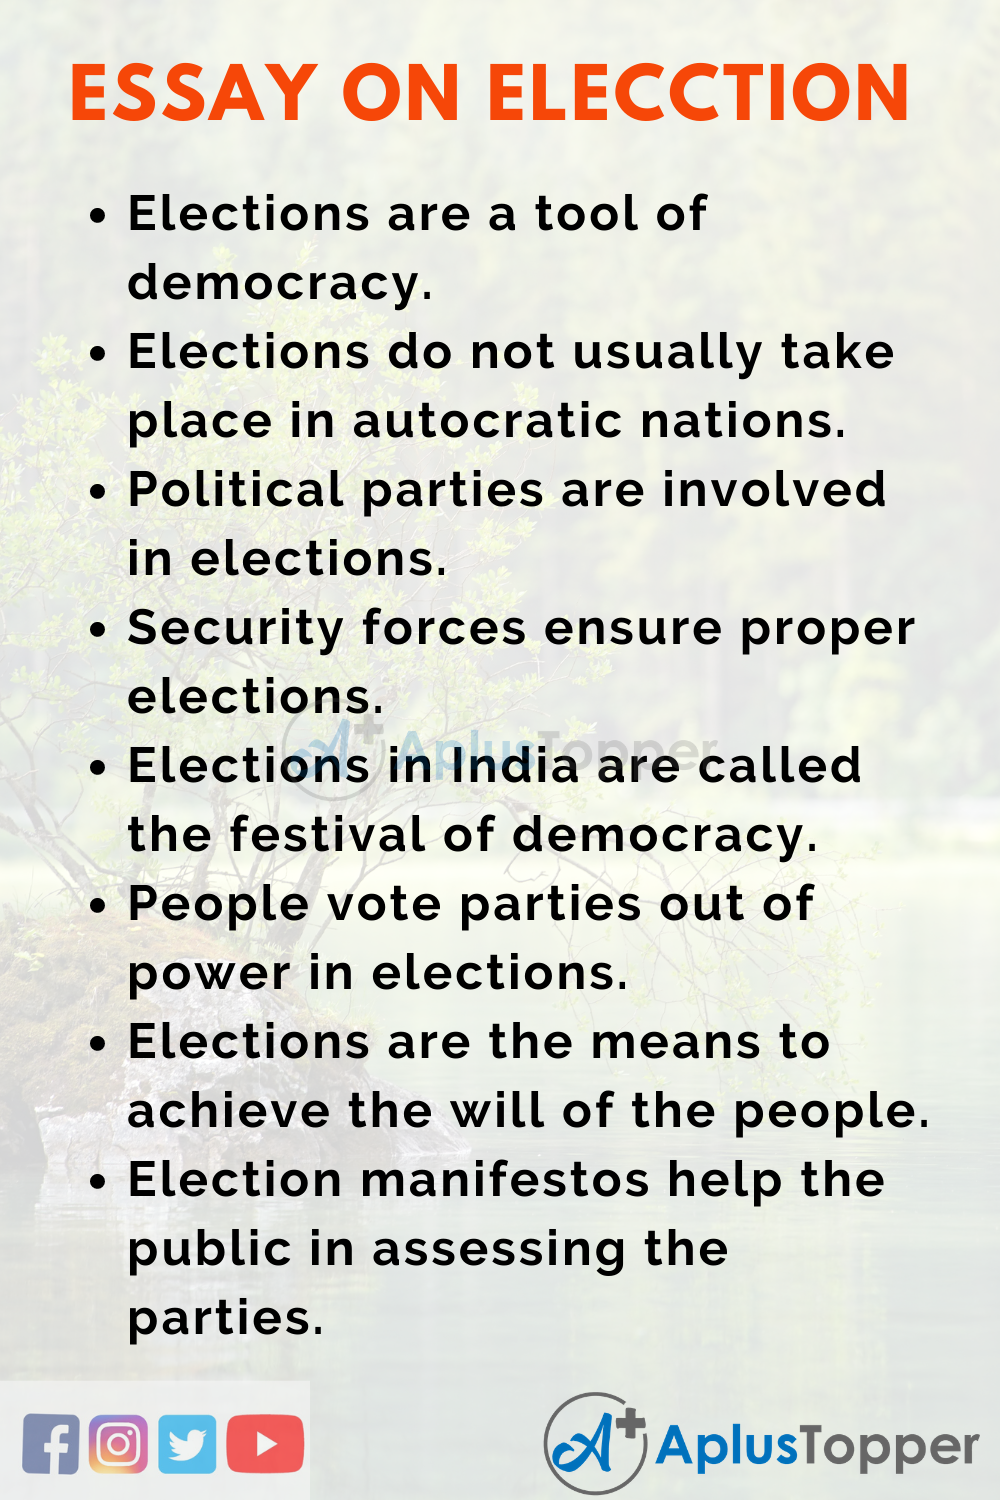 essay on election in india 250 words